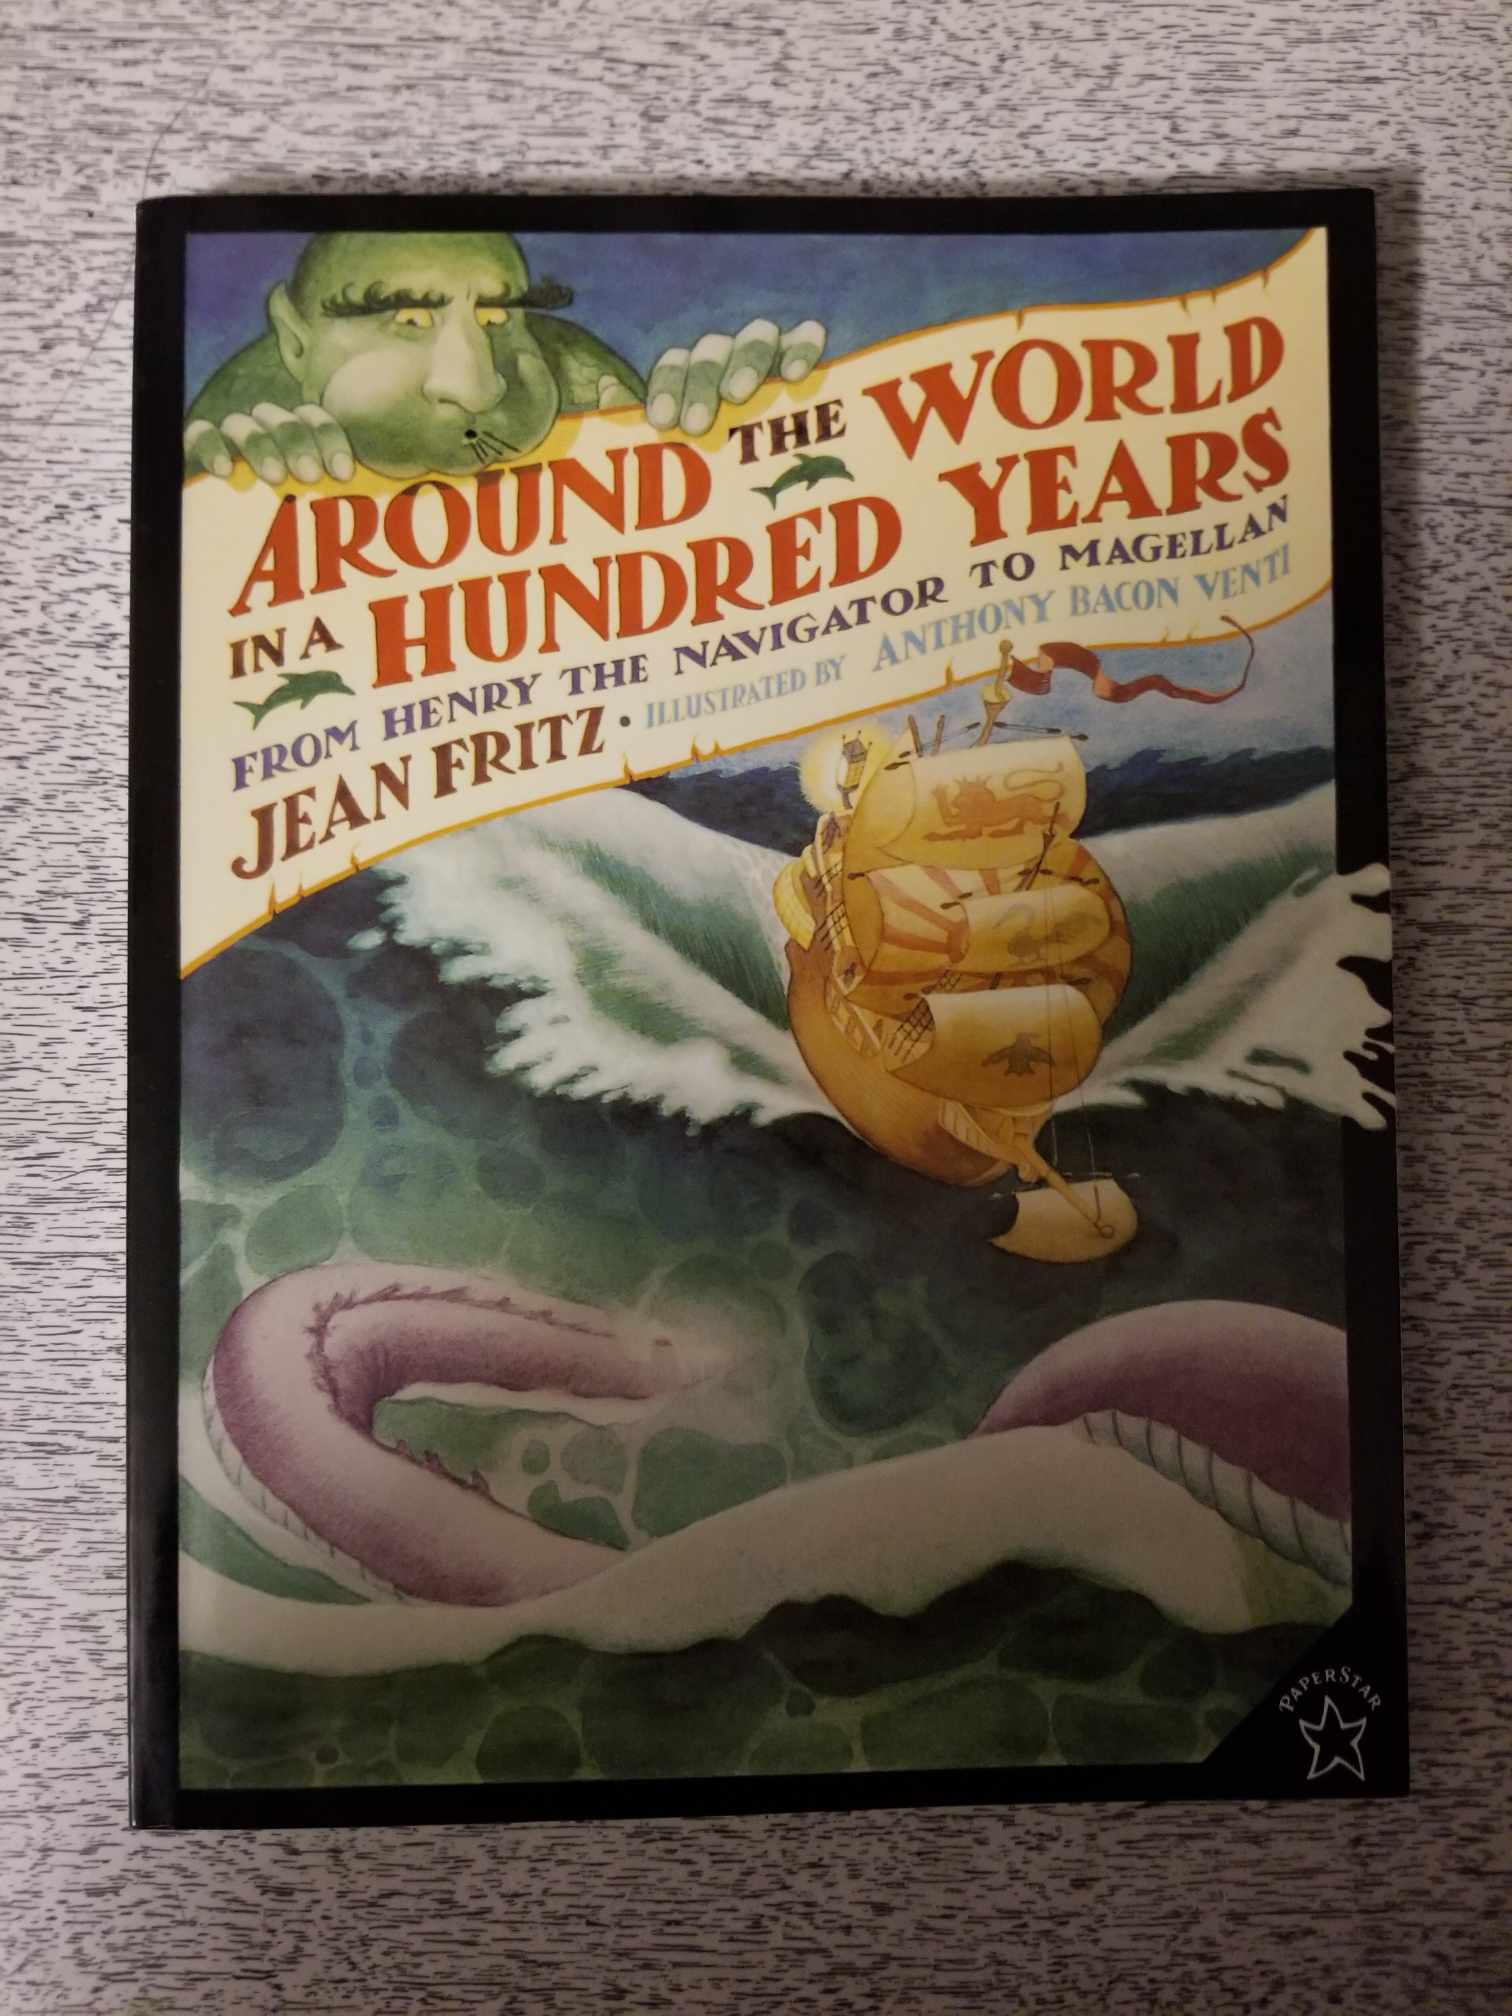 Around the World in a Hundred Years: From Henry the Navigator to Magellan by Jean Fritz